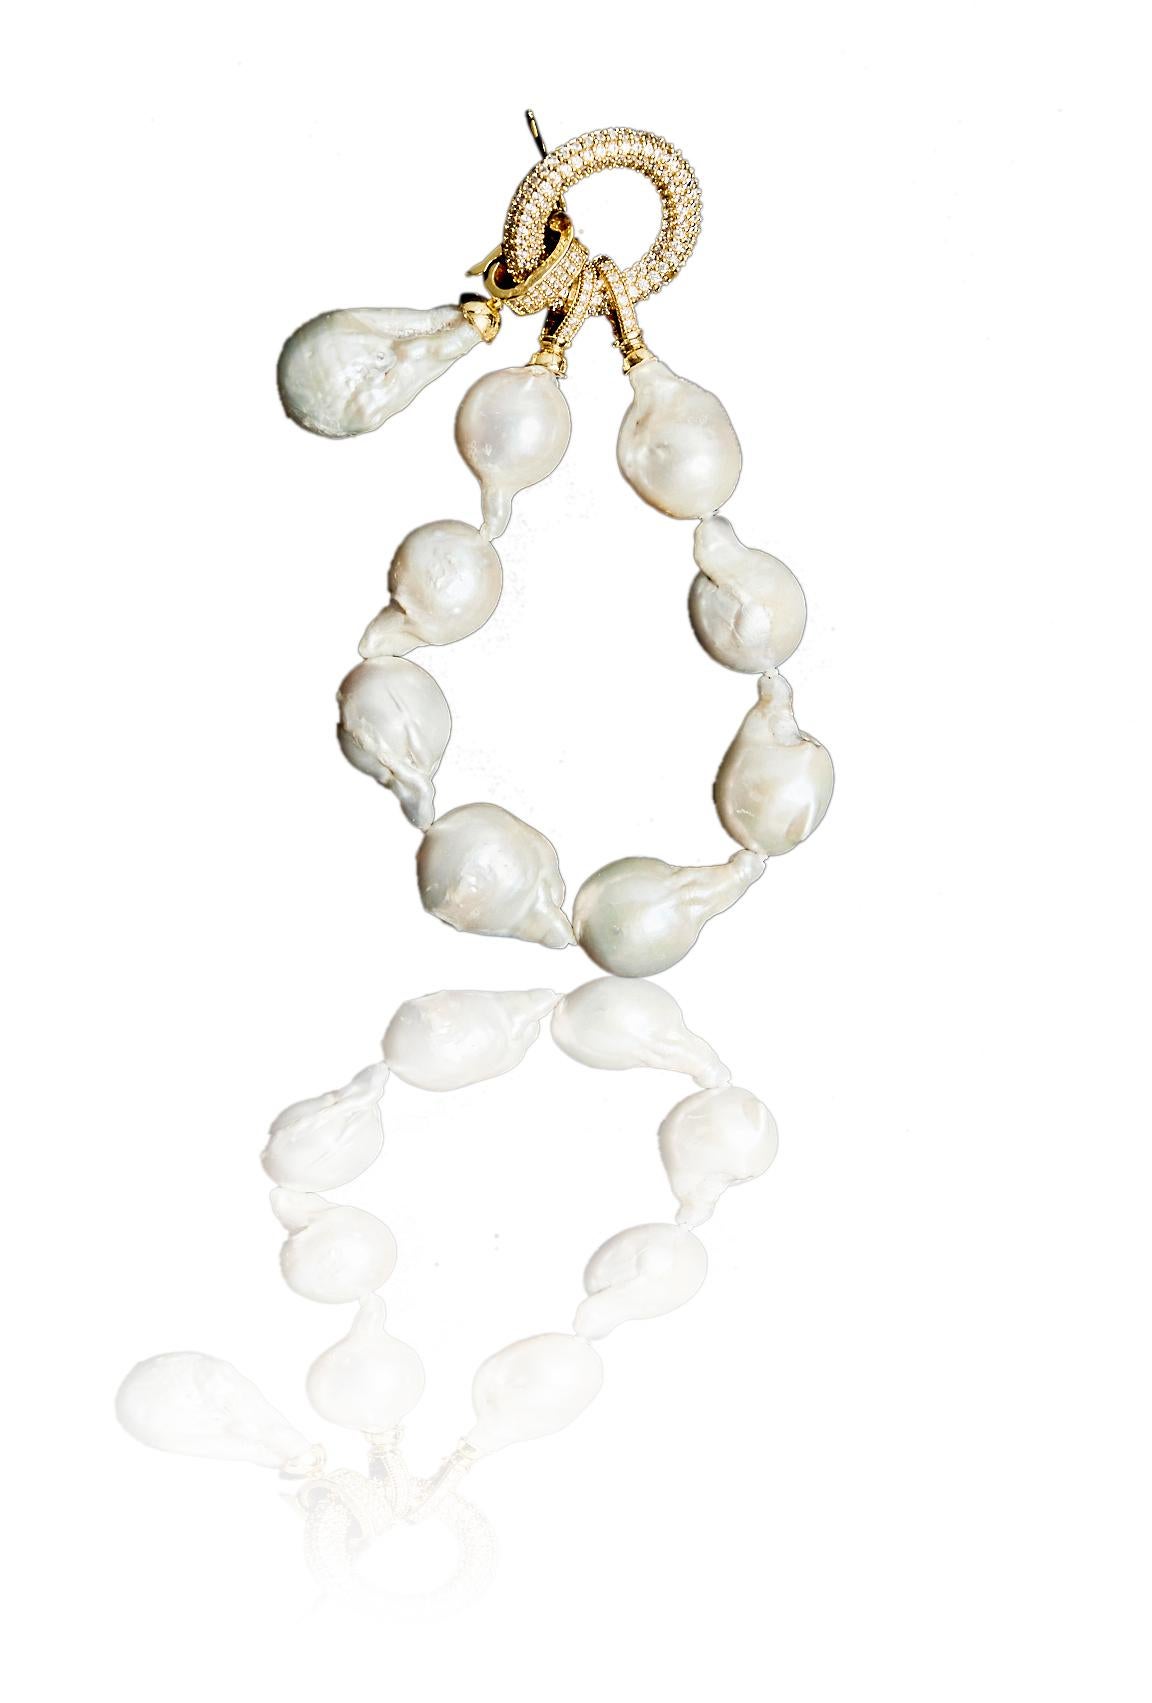 Women's or Men's Baroque Pearl Bracelet with Pendant For Sale